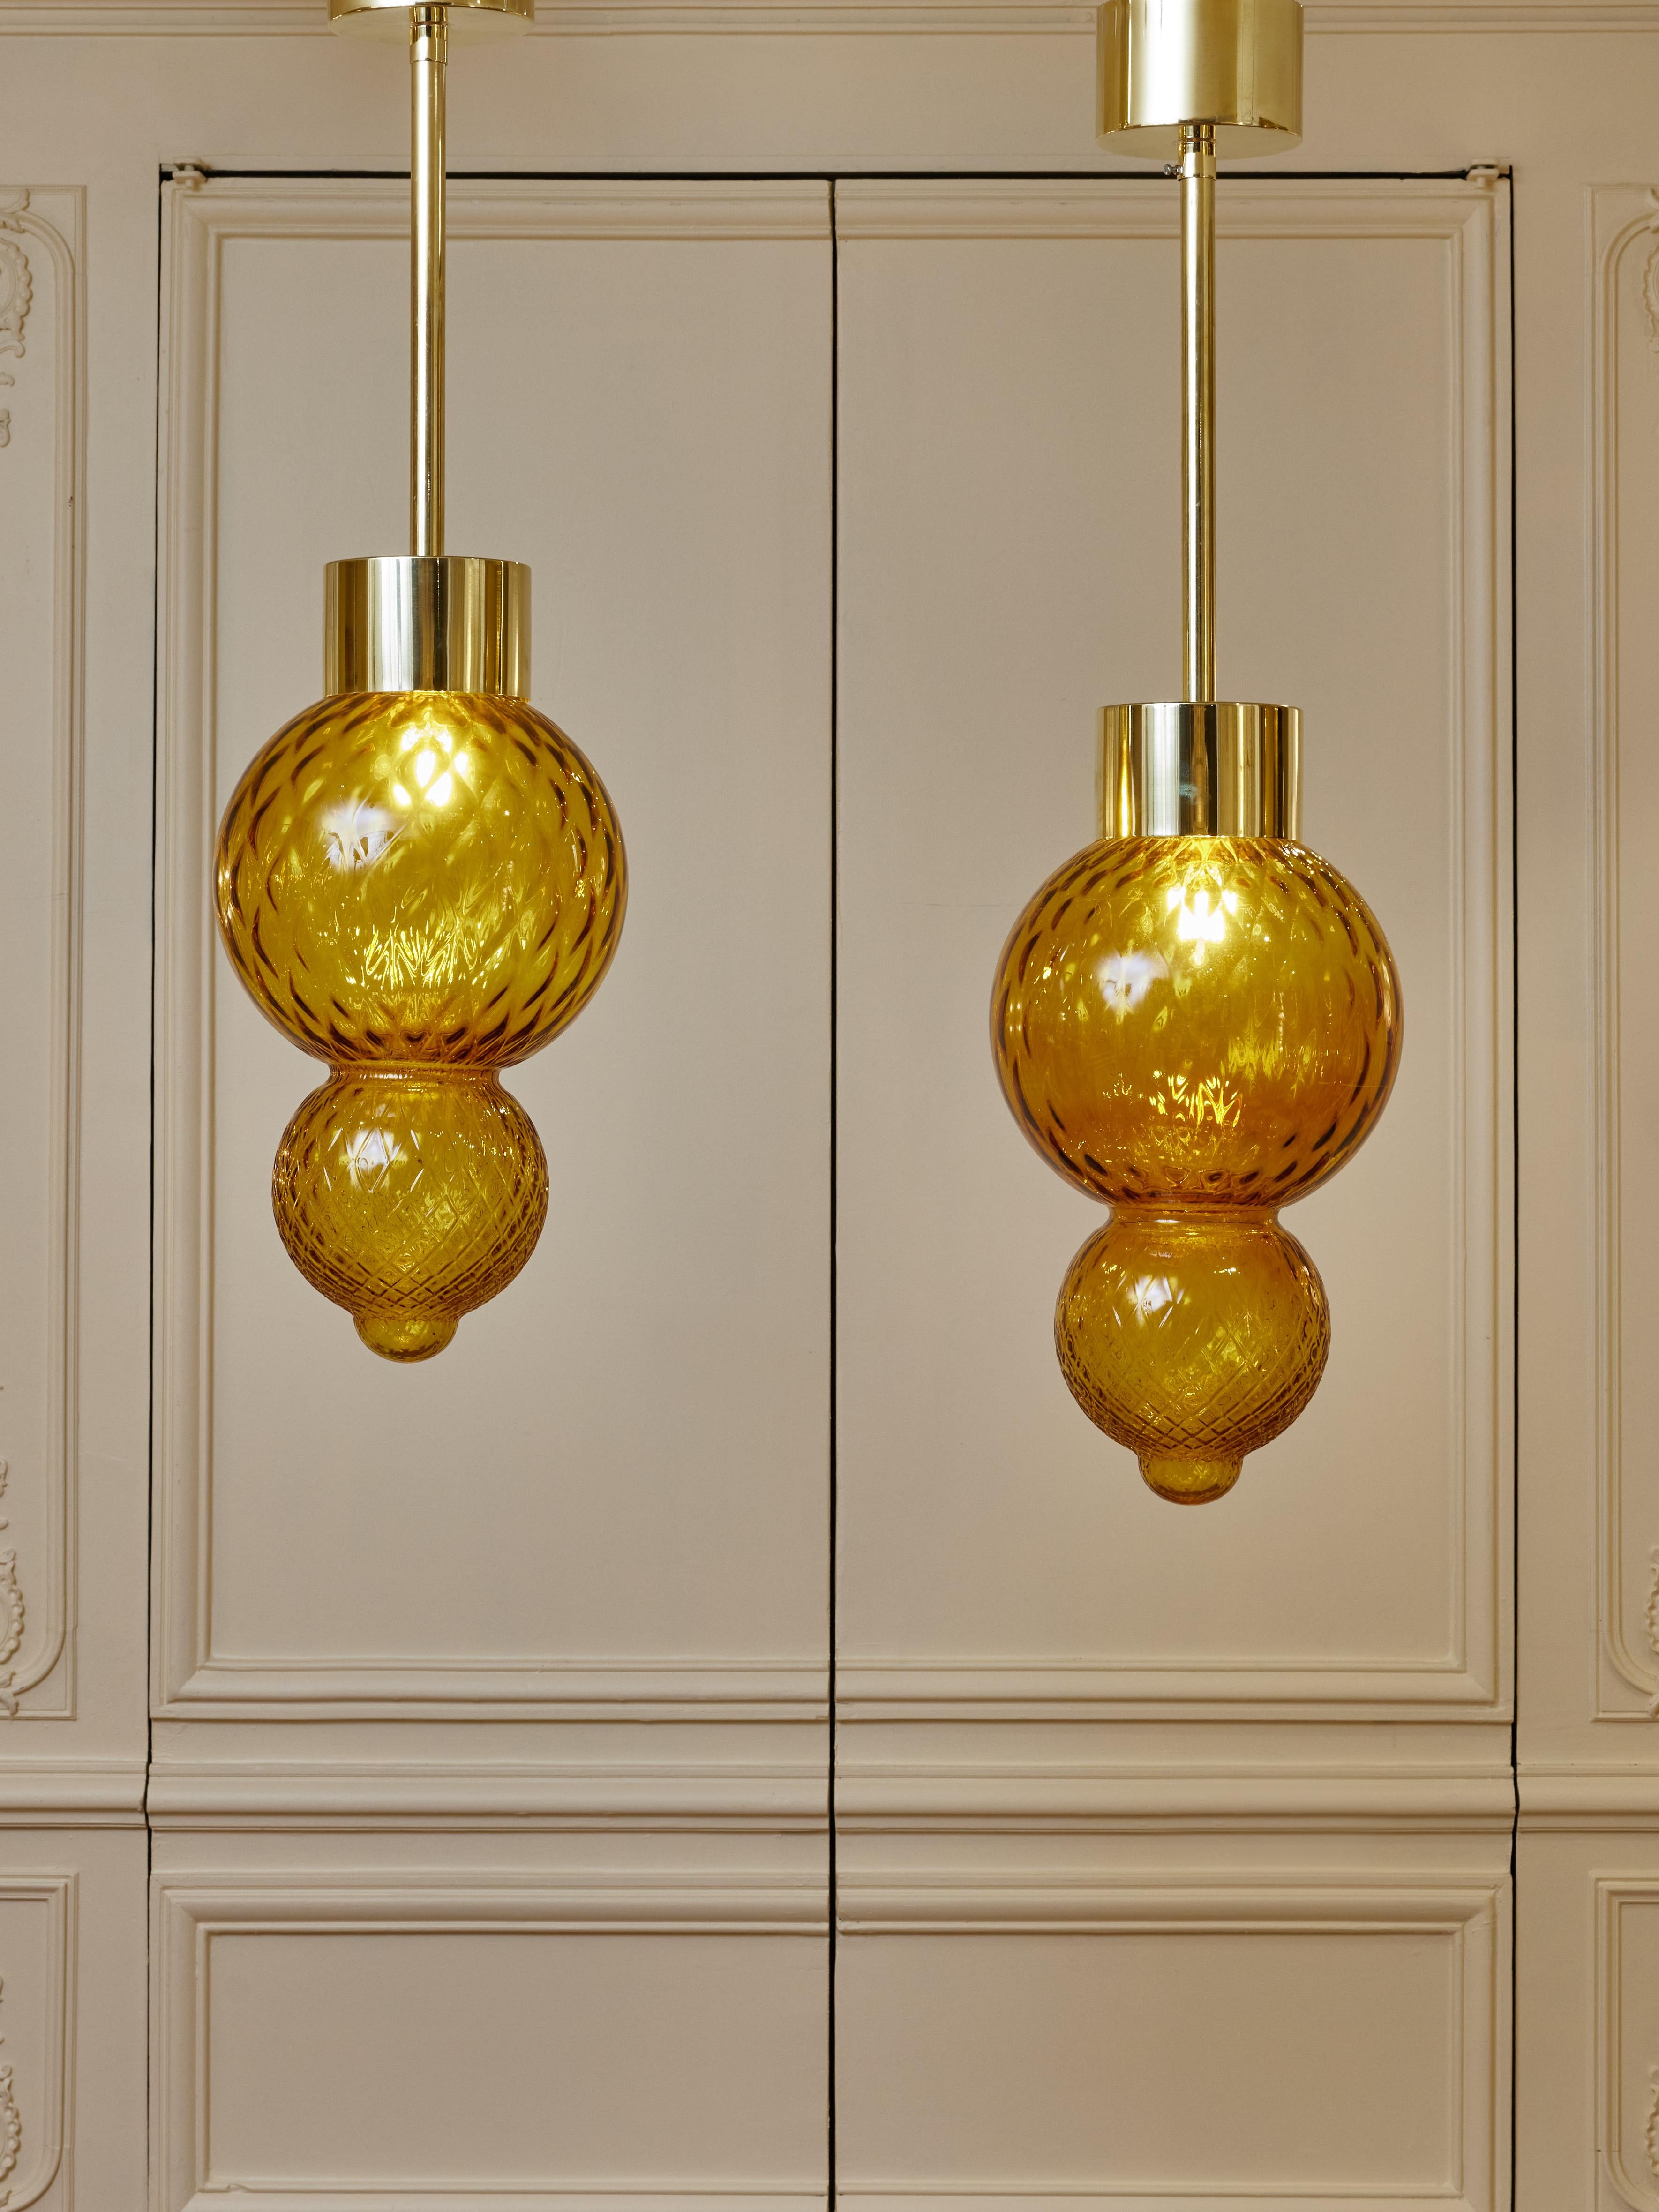 Superb pair of brass lanterns in amber tainted and sculpted Murano glass.
Creation by Studio Glustin.
Italy, 2024
